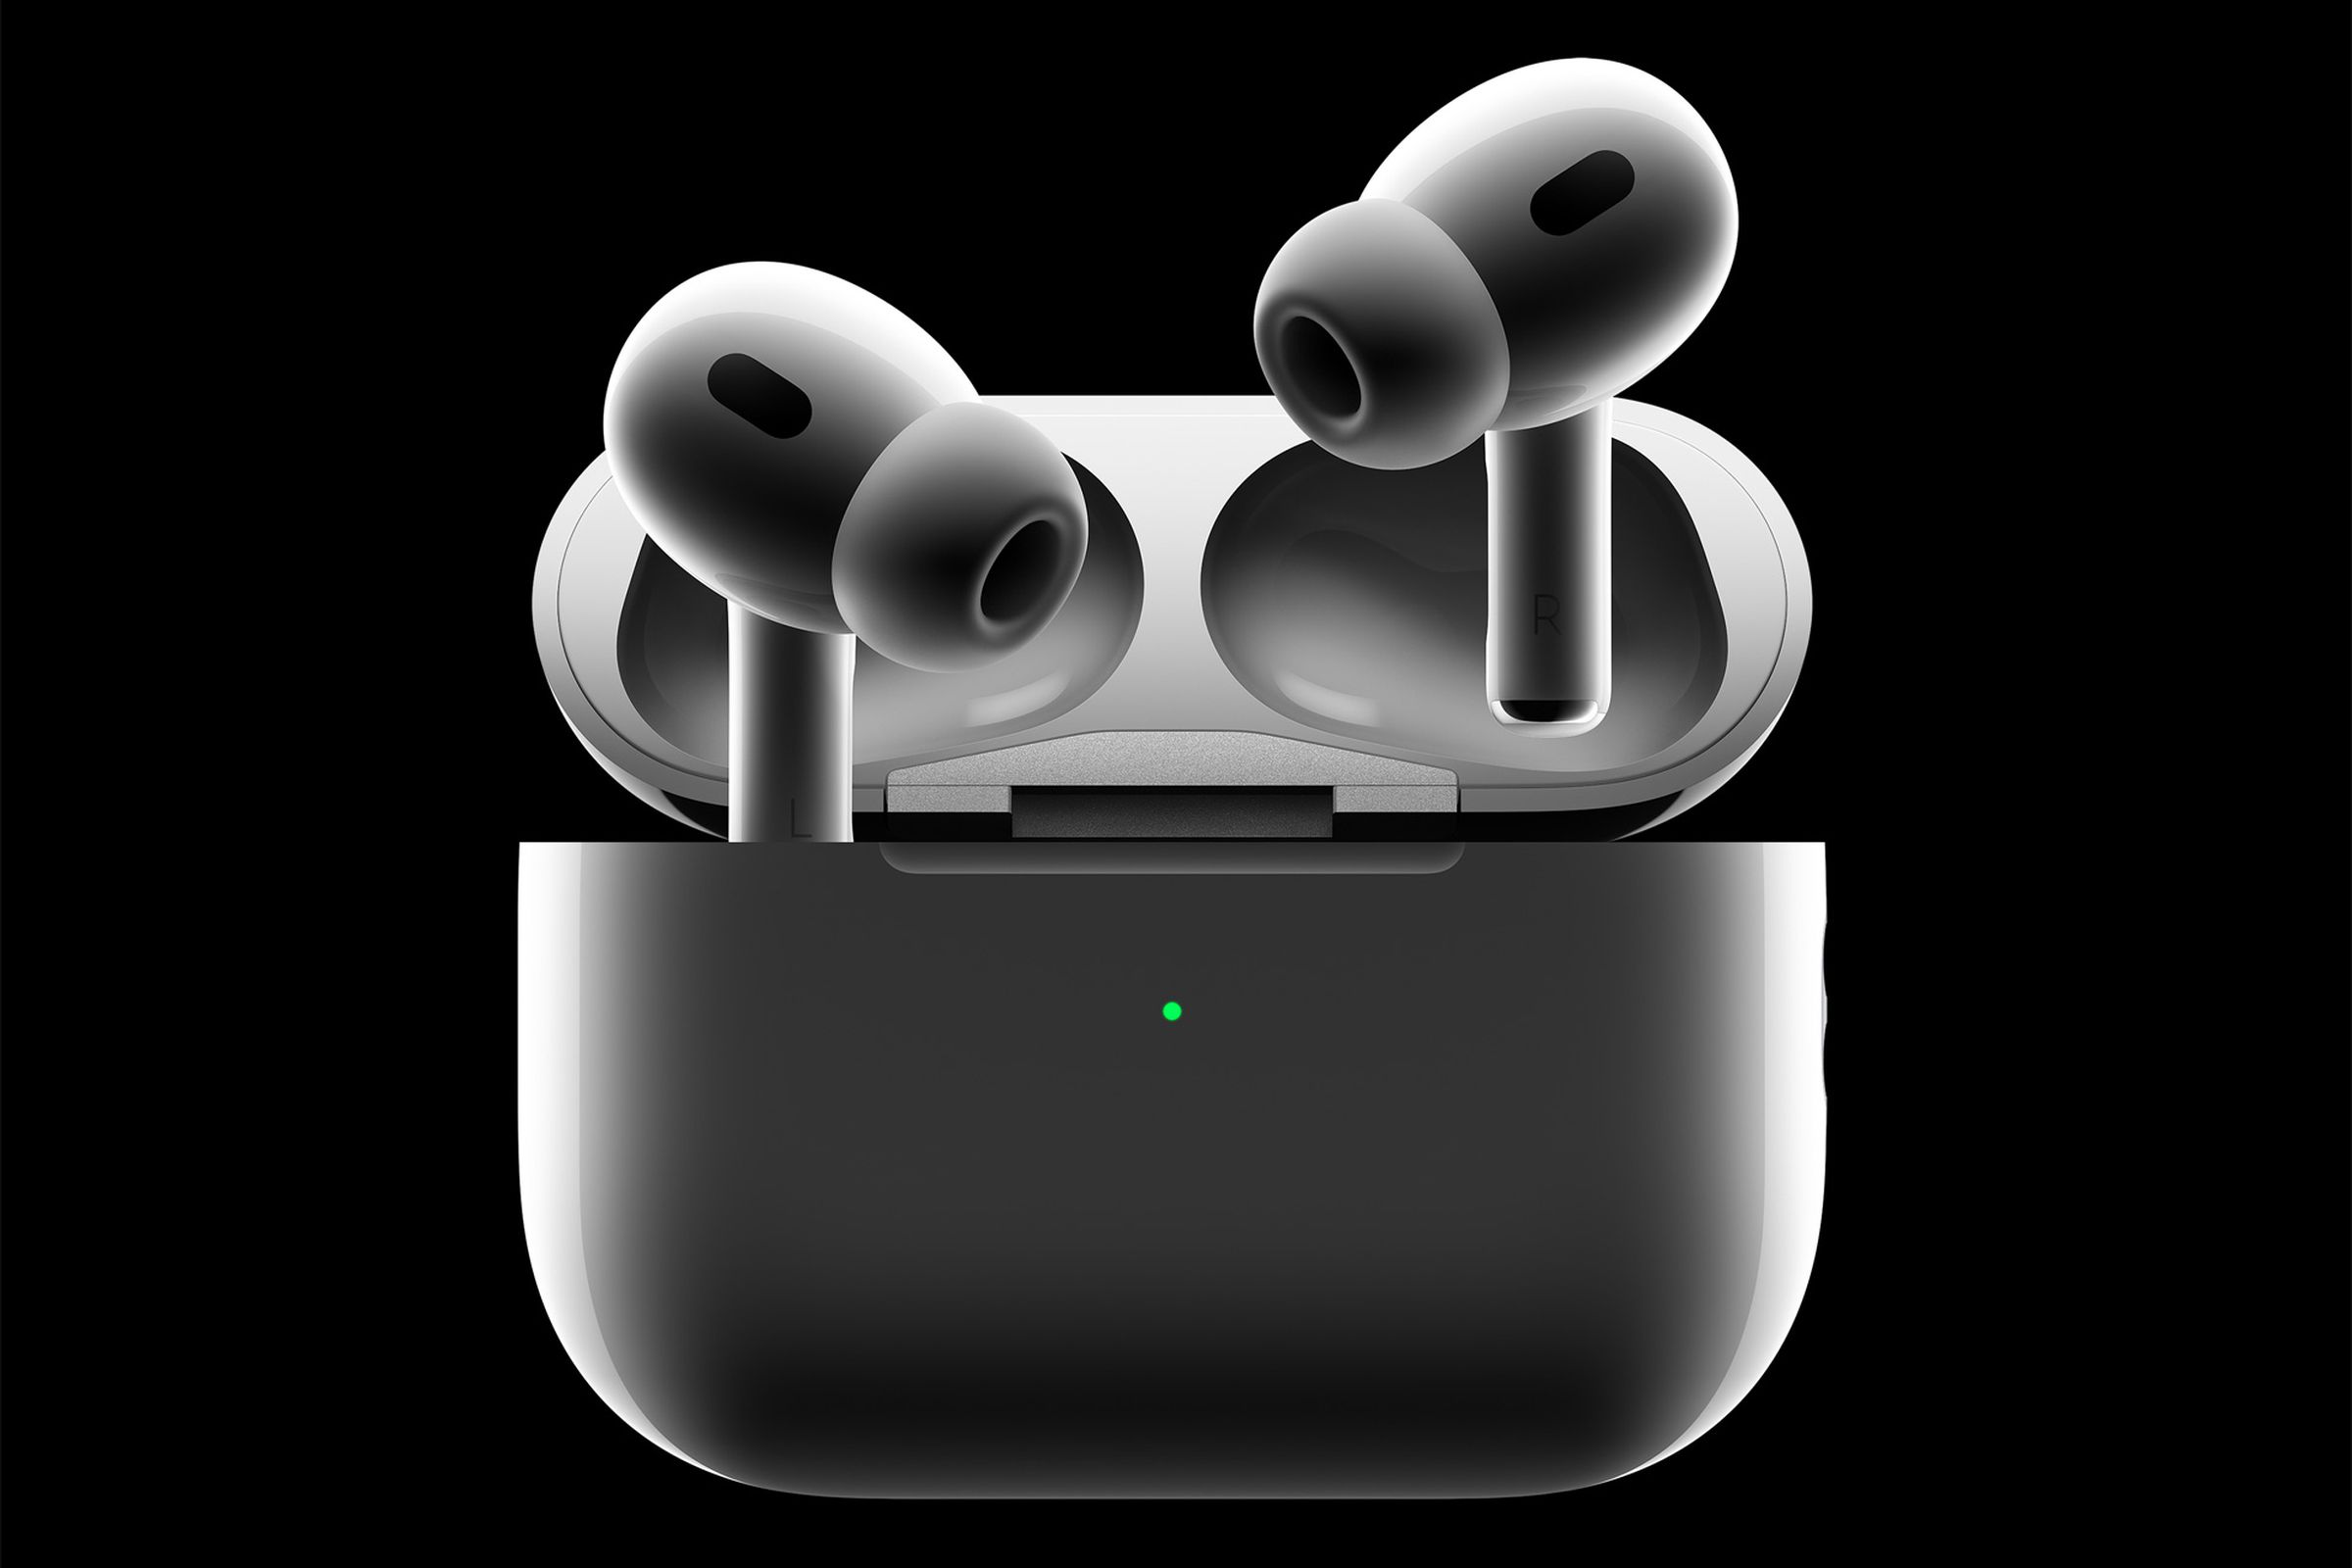 A promotional image of Apple’s second generation AirPods Pro on a black background. They look quite similar to the original AirPods Pro.